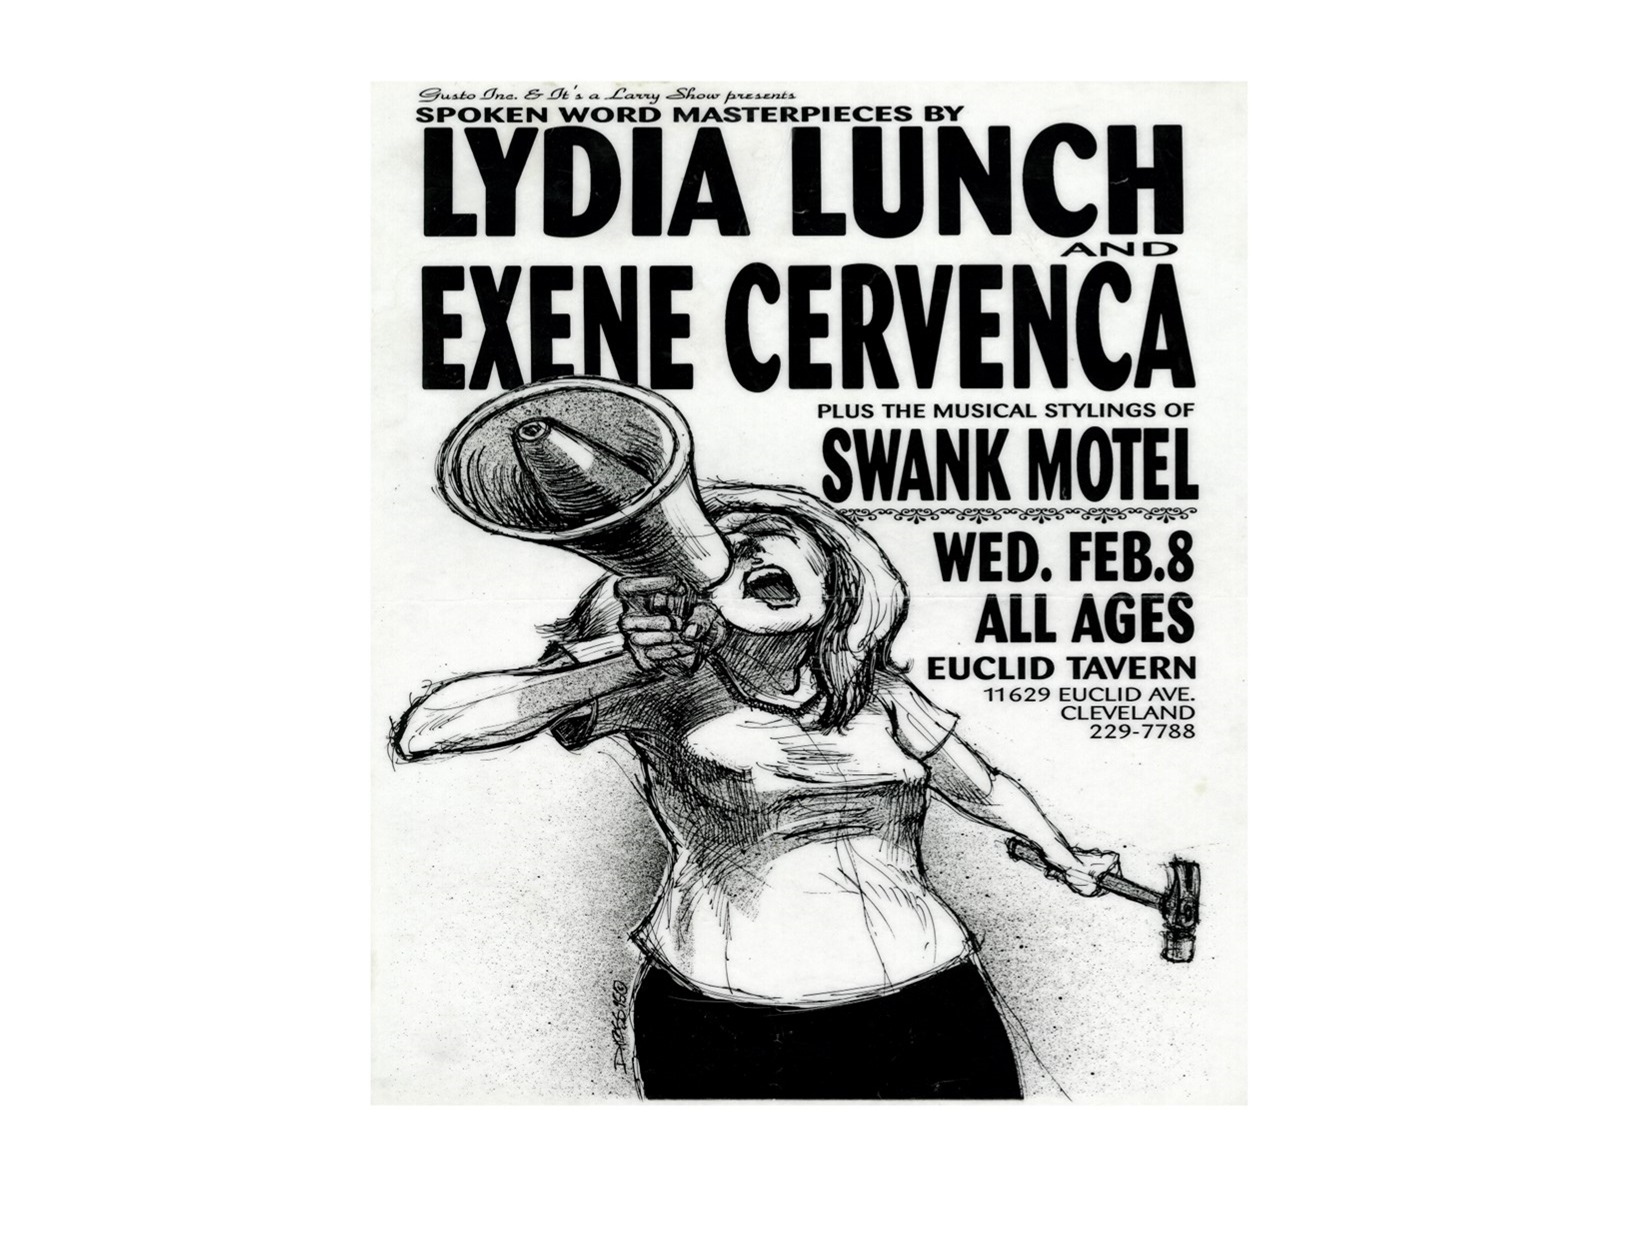 Buddy Love with Swank Motel at Lydia Lunch & Excene Cervenka in 1995